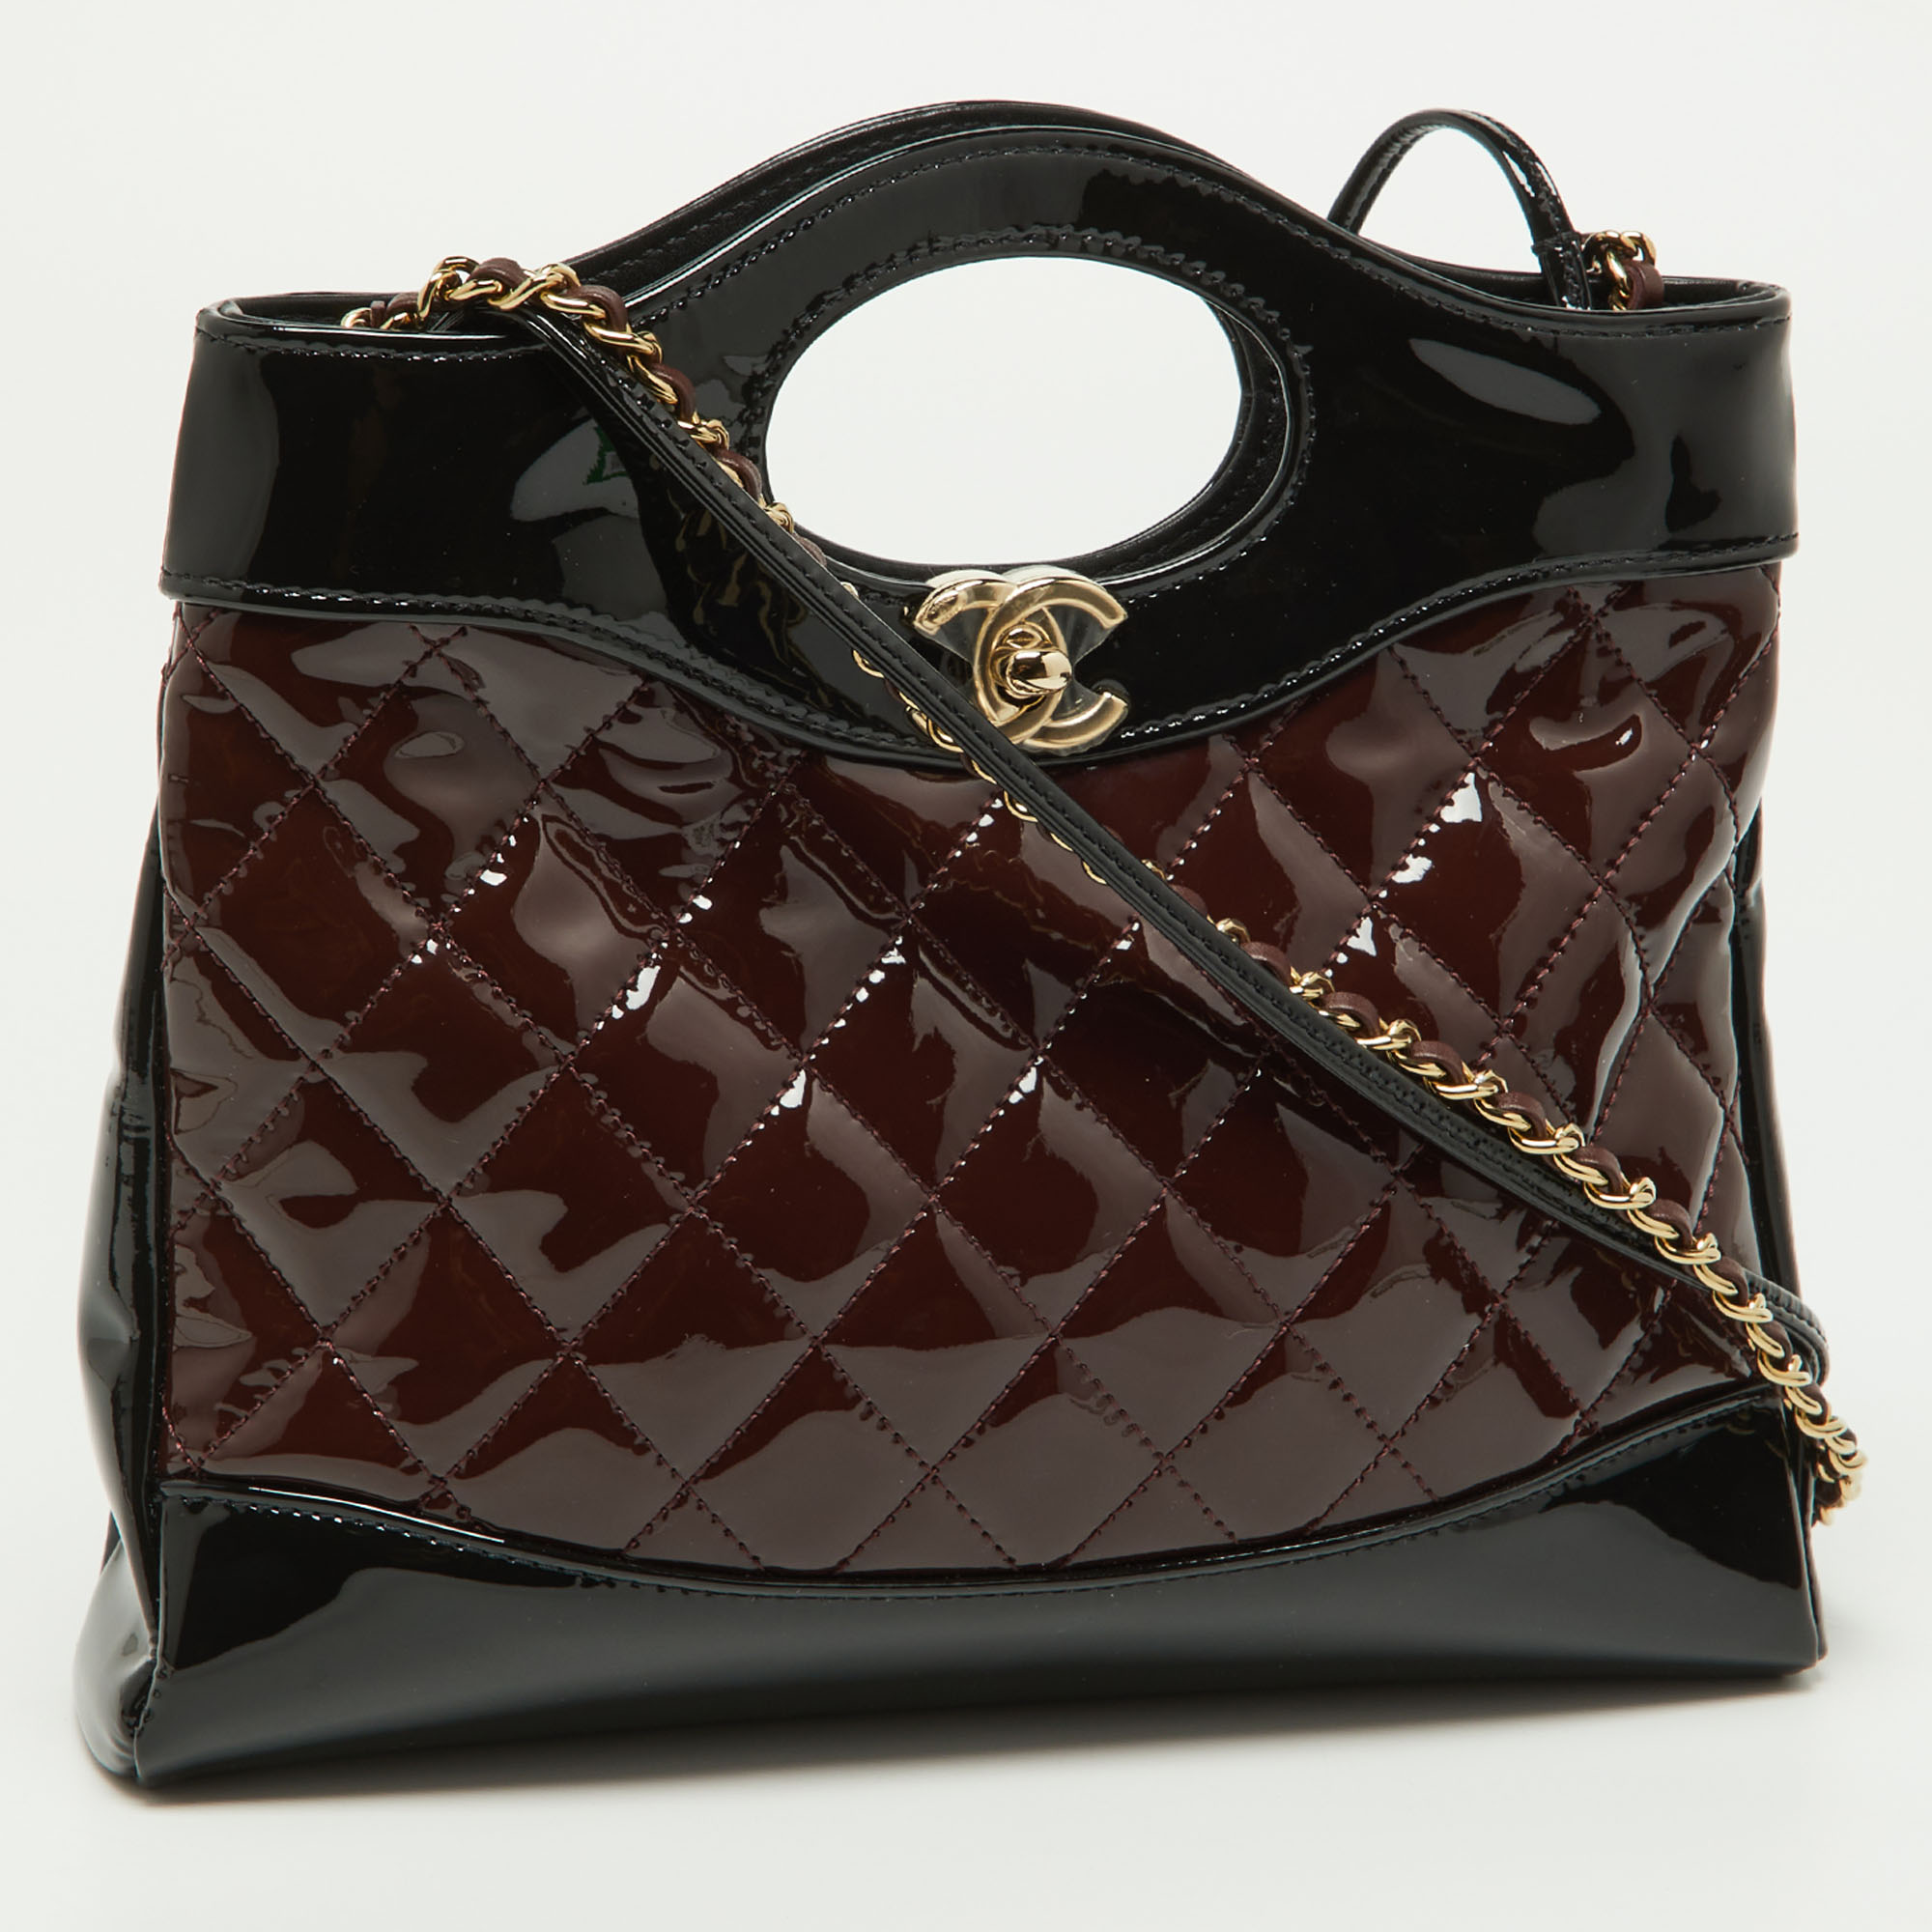 Chanel Black/Burgundy Quilted Patent Leather Mini 31 Shopping Tote